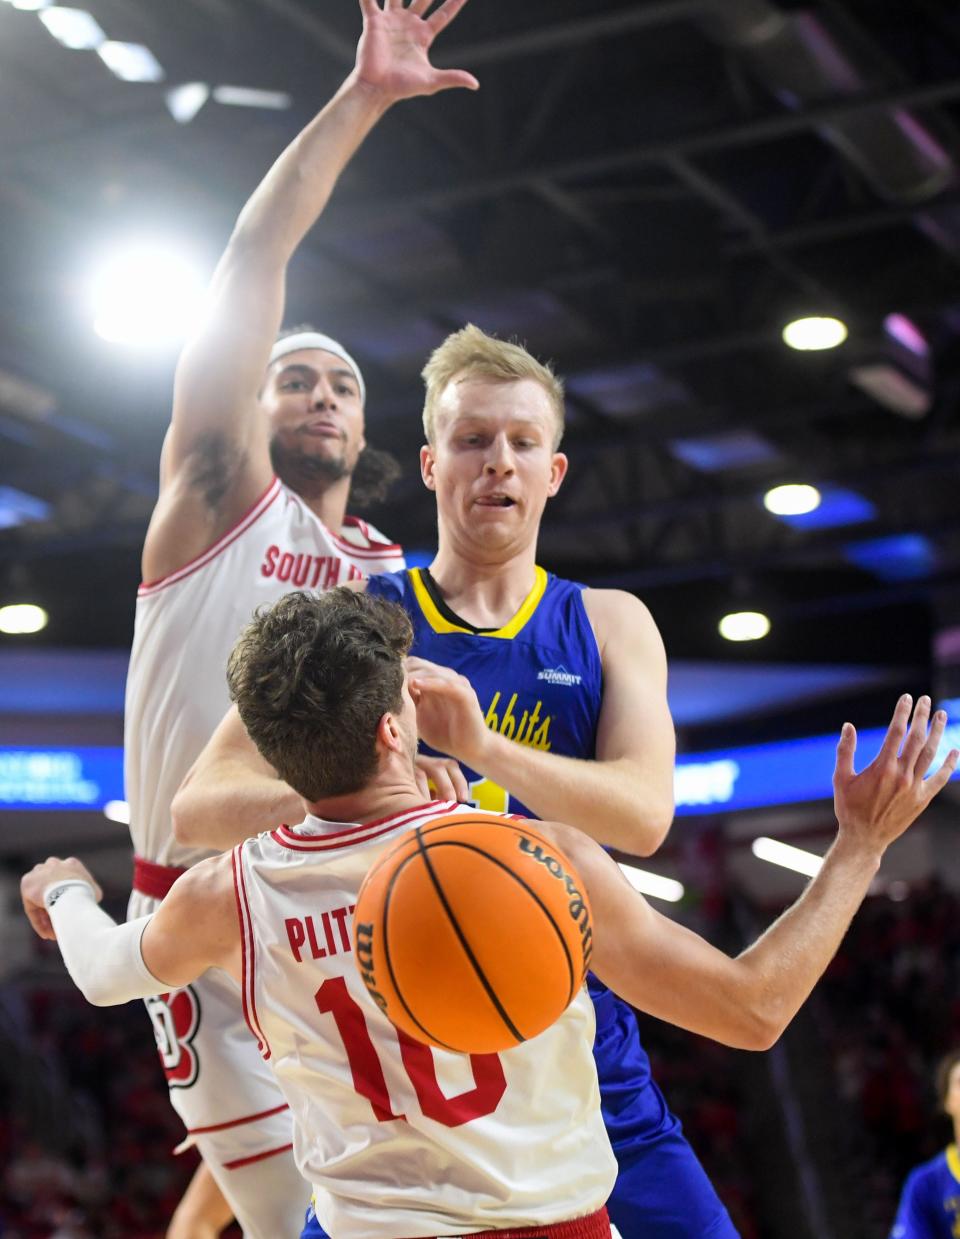 South Dakota’s Damani Hayes and A.J. Plitzuweit collide with South Dakota State’s Matthew Mors near the basket in a rivalry matchup on Saturday, January 14, 2023, at the Sanford Coyote Sports Center in Vermillion.